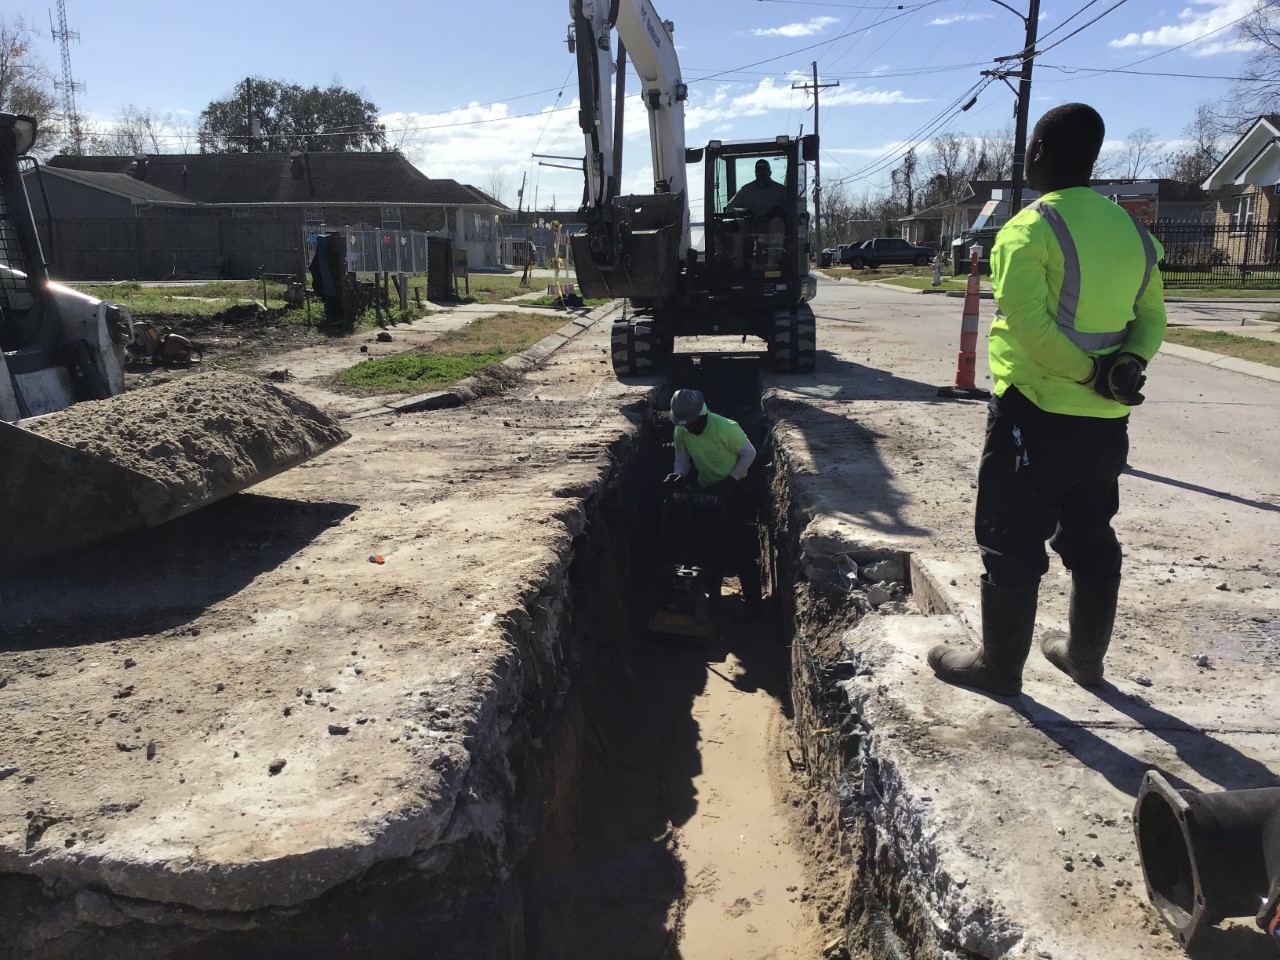 LOWER NINTH WARD NORTHWEST GROUP B APPROACHES 80 PERCENT COMPLETE